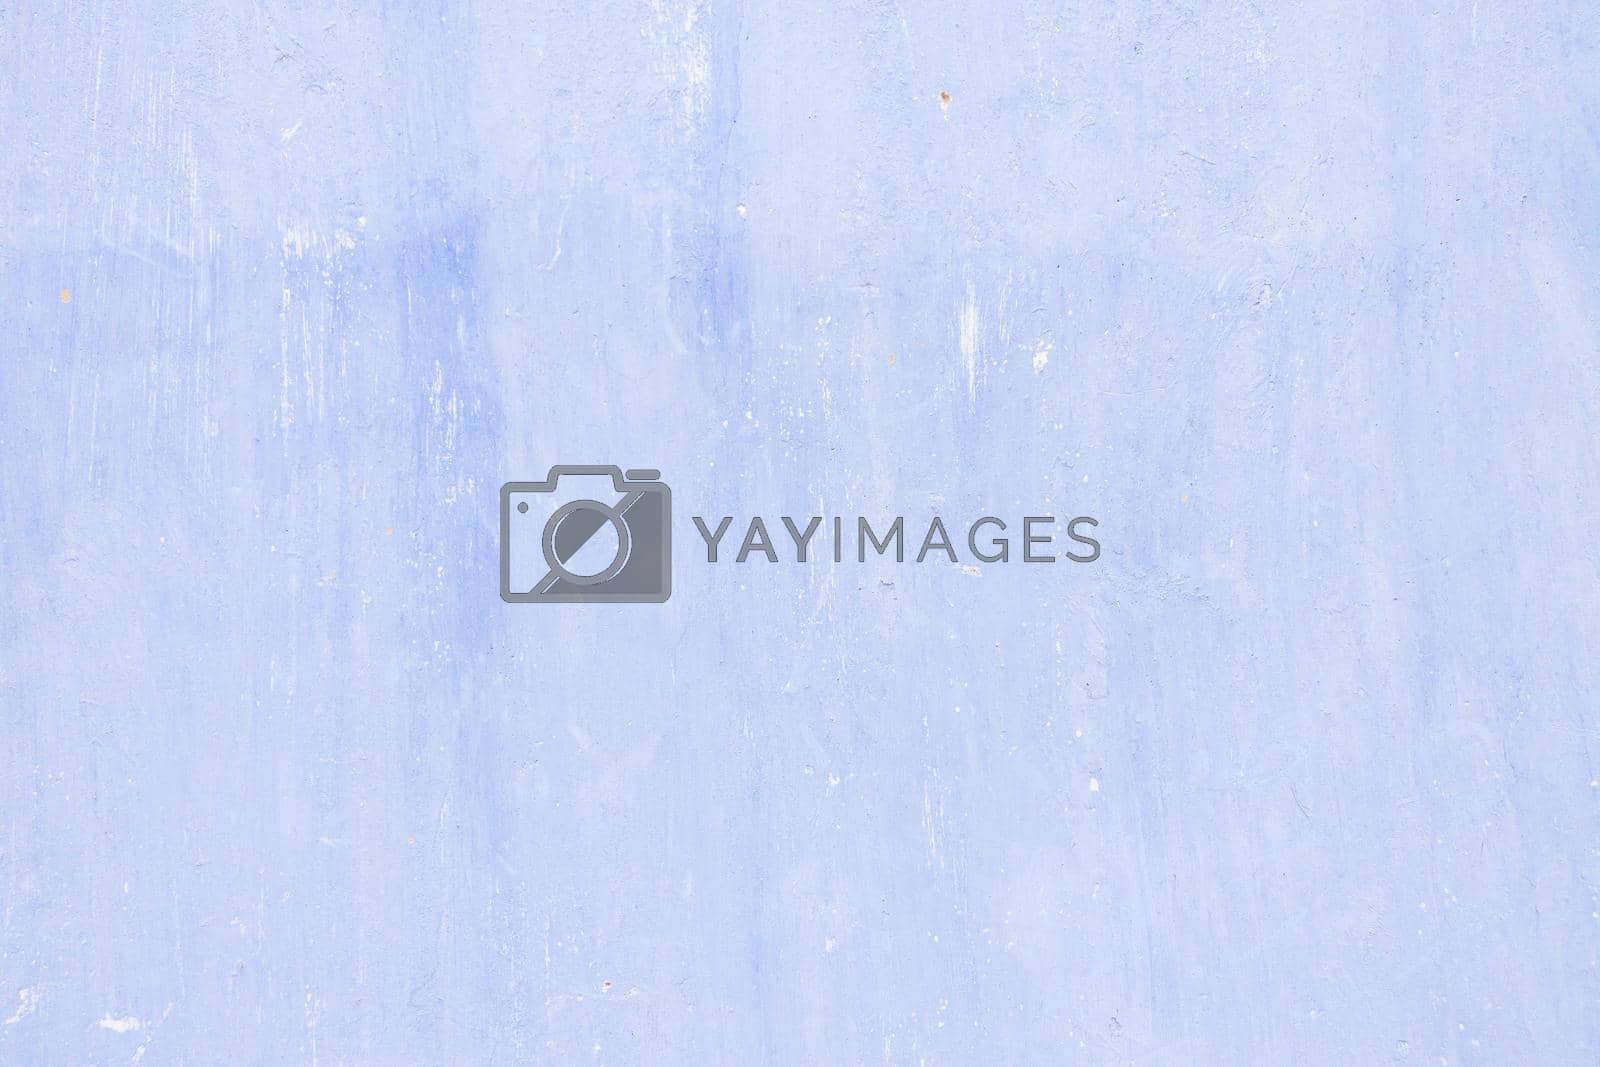 Royalty free image of Old texture turquoise light blue cracked wall, the old paint texture is chipping and cracked fall destruction by nandrey85